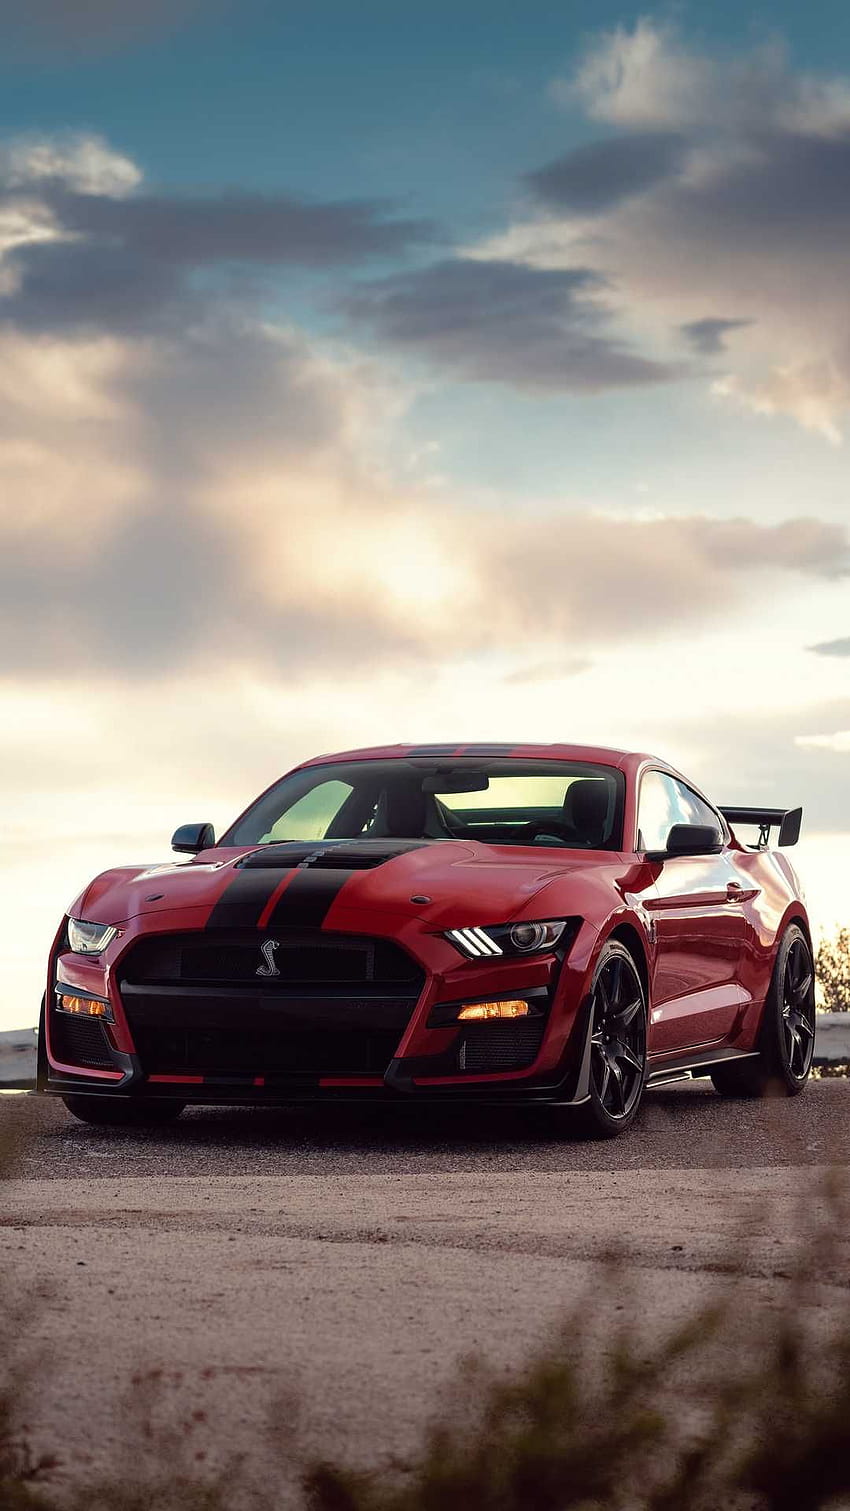 Nuovo, 2020 Ford Mustang Shelby GT500, angolo anteriore rosso, 2020 ford mustang gt500 iphone Sfondo del telefono HD